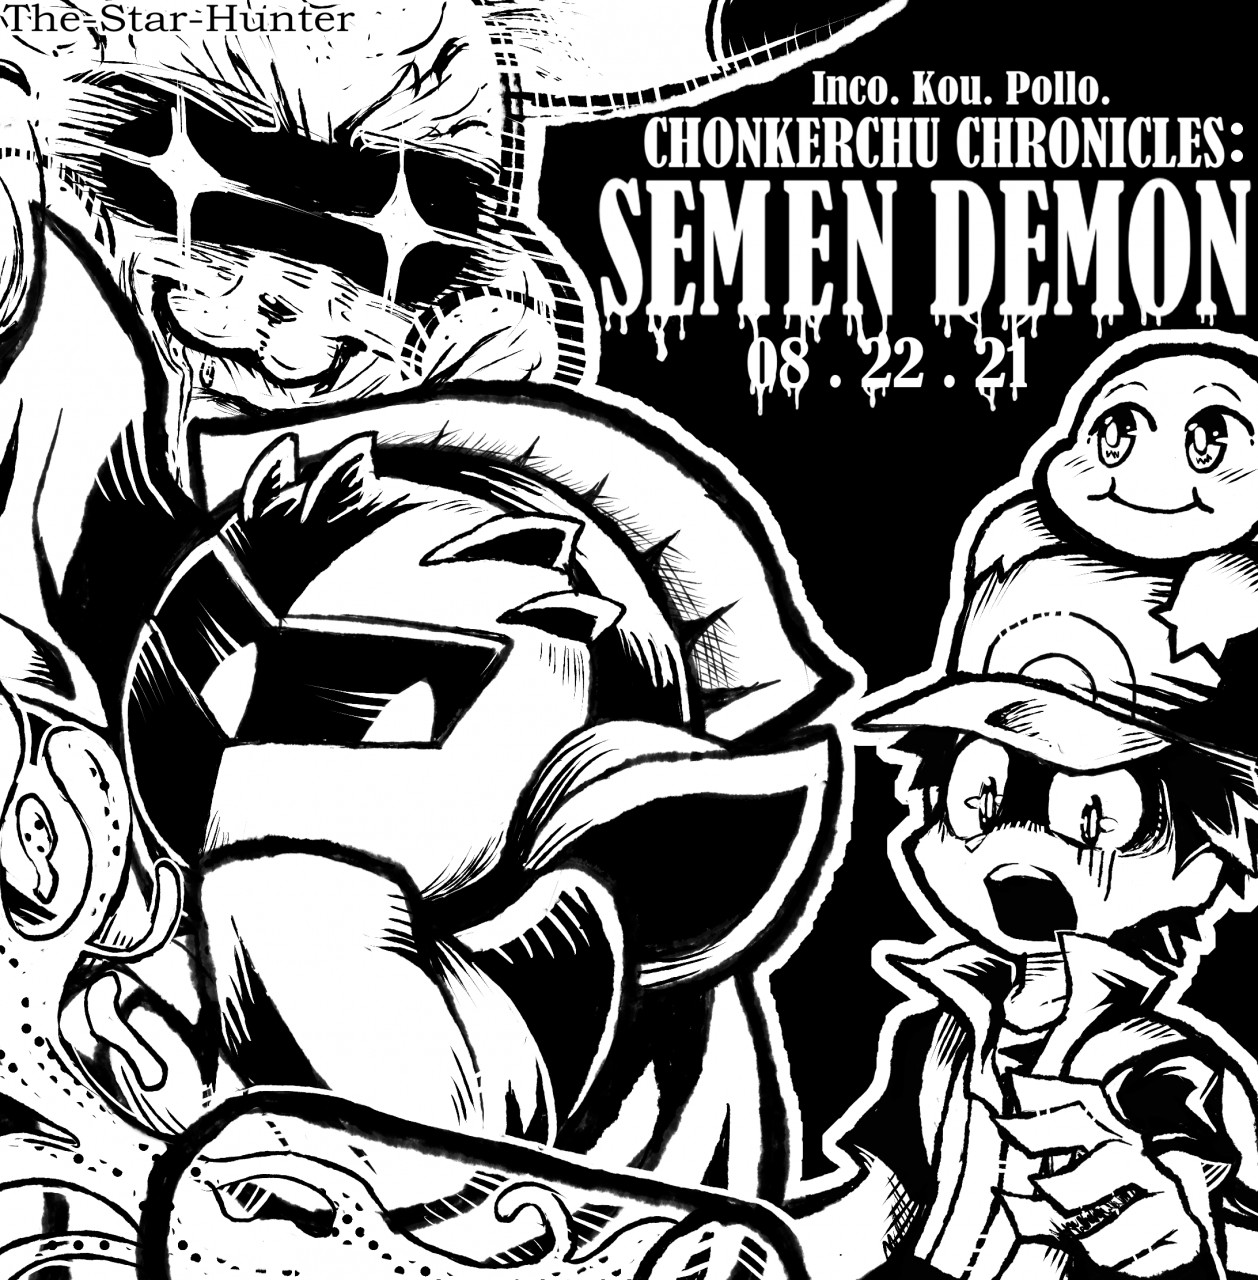 Who is this semon demon